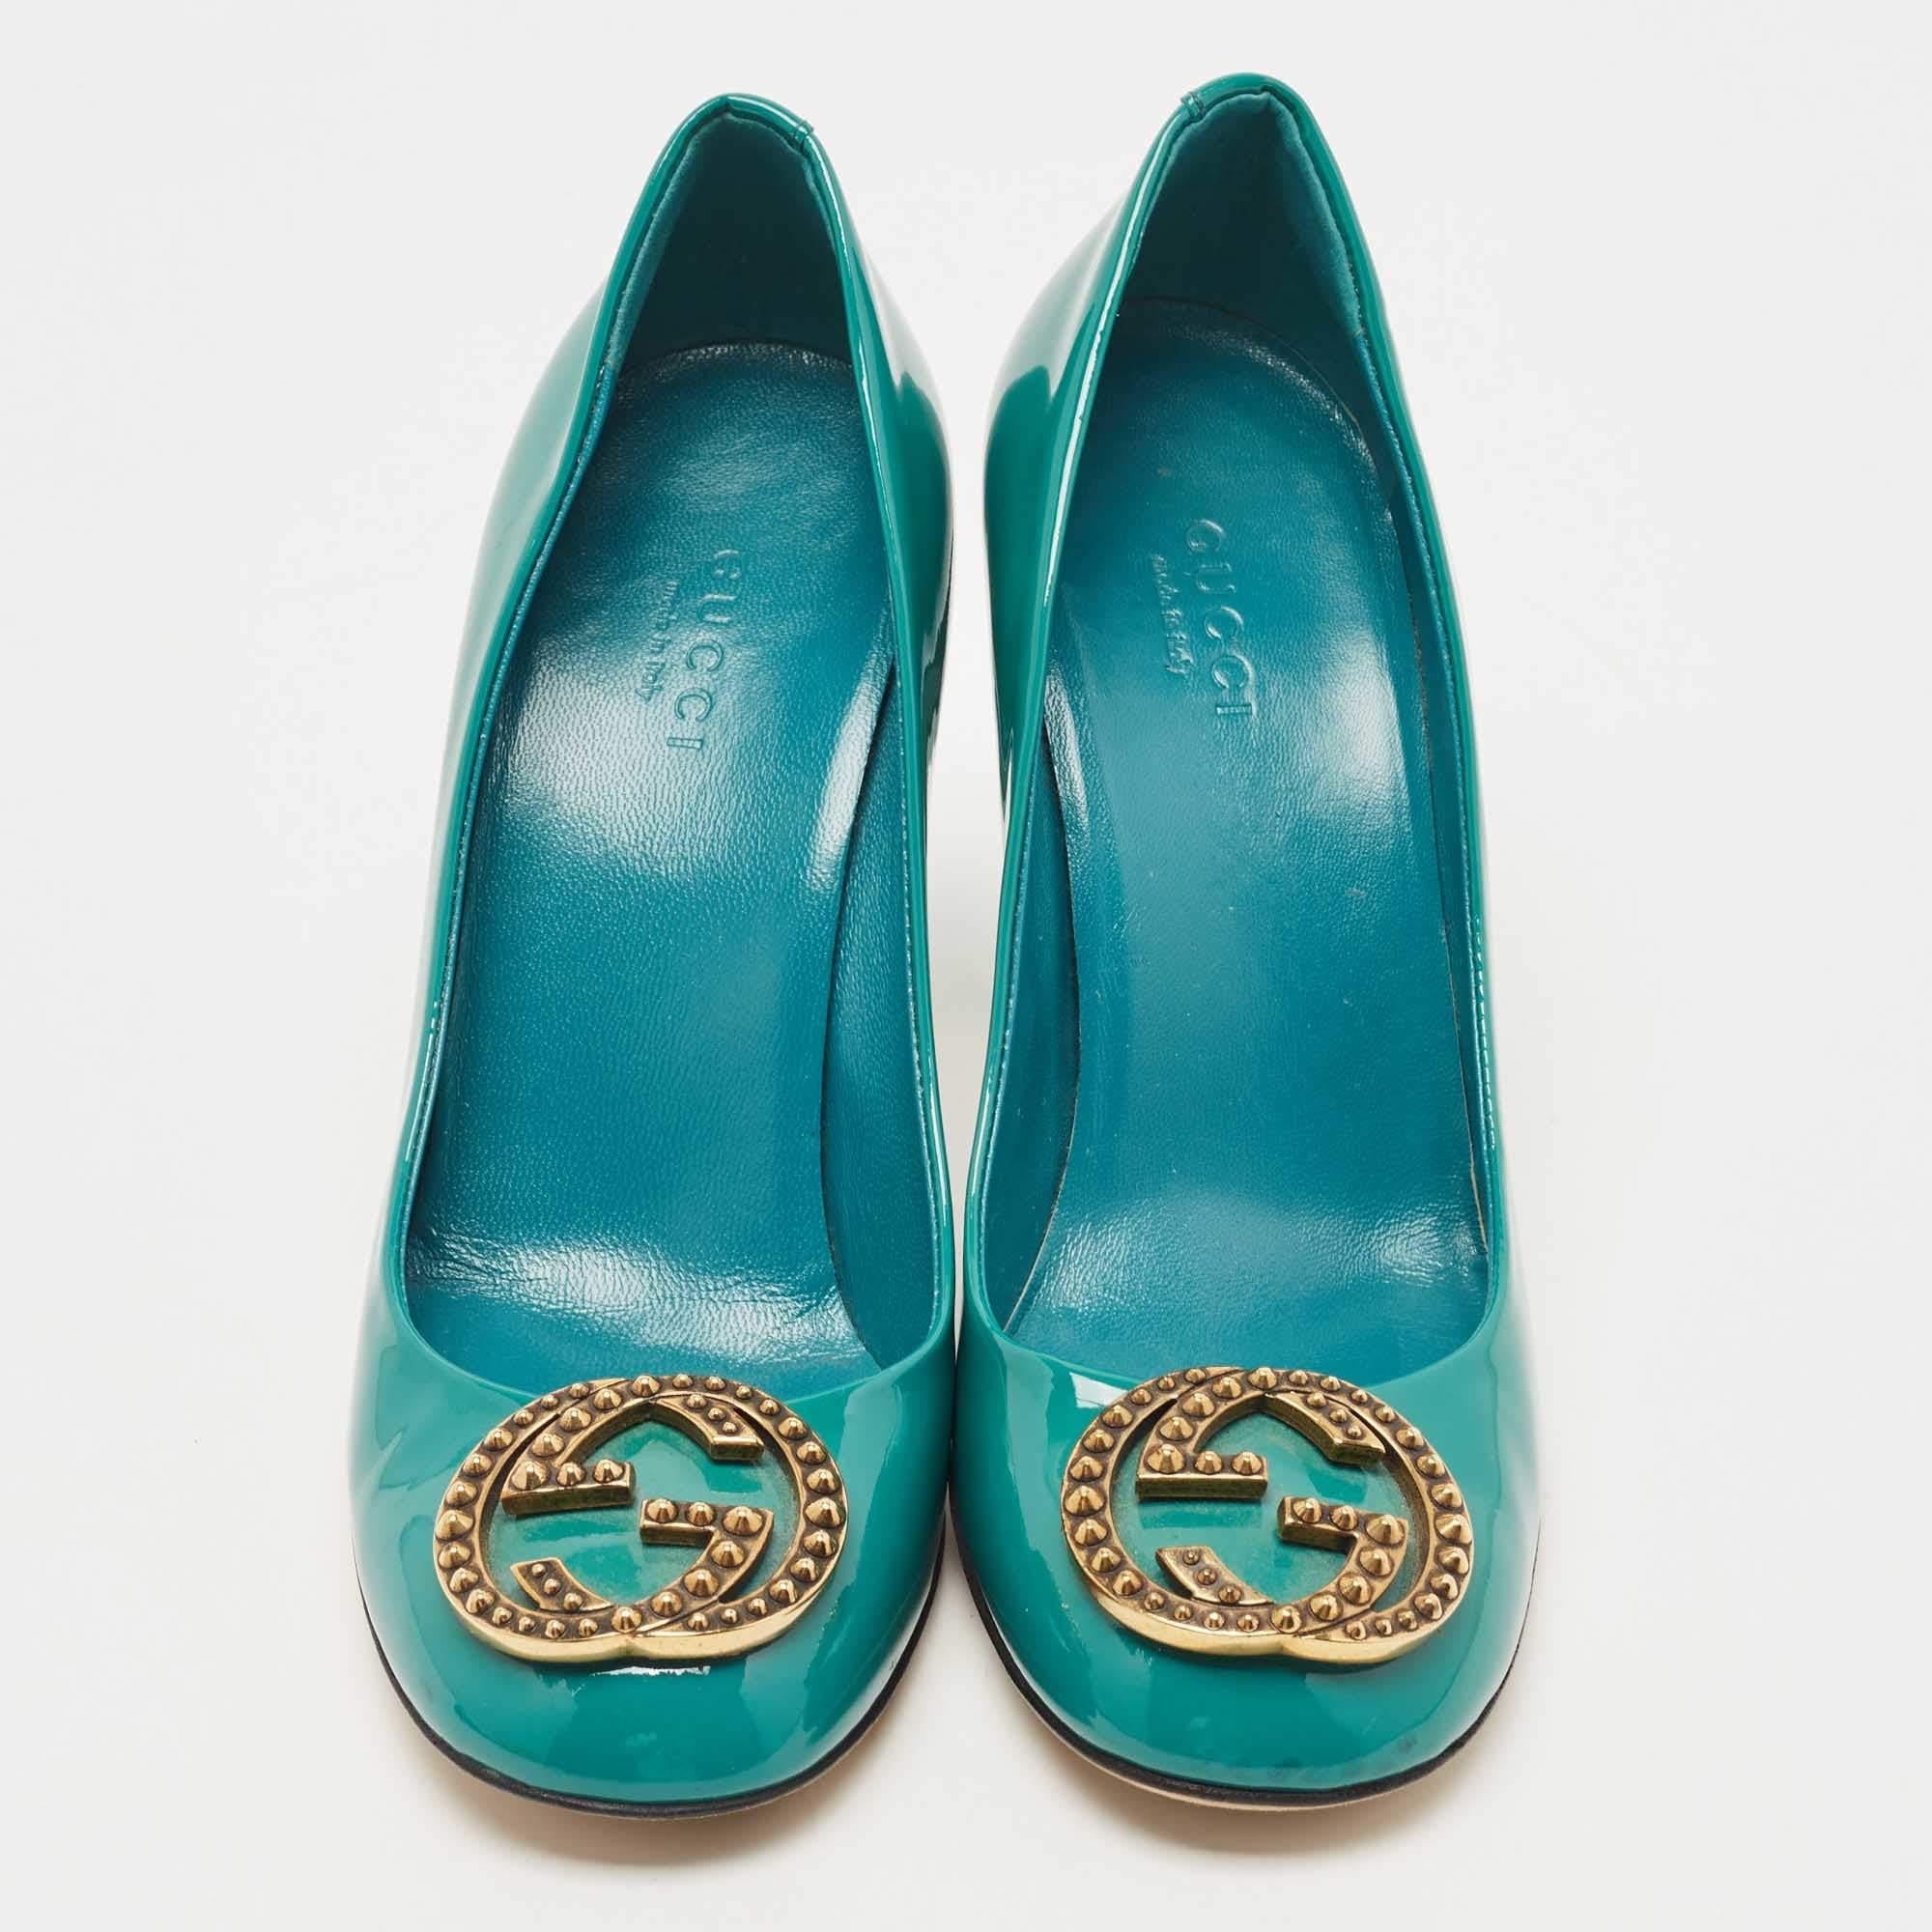 Great for work or a day out, these Gucci pumps will take you look to the next level. The green patent leather uppers are highlighted with the signature interlocking GG buckles at the vamps. They feature 8.5cm heels and round toes. The insoles are